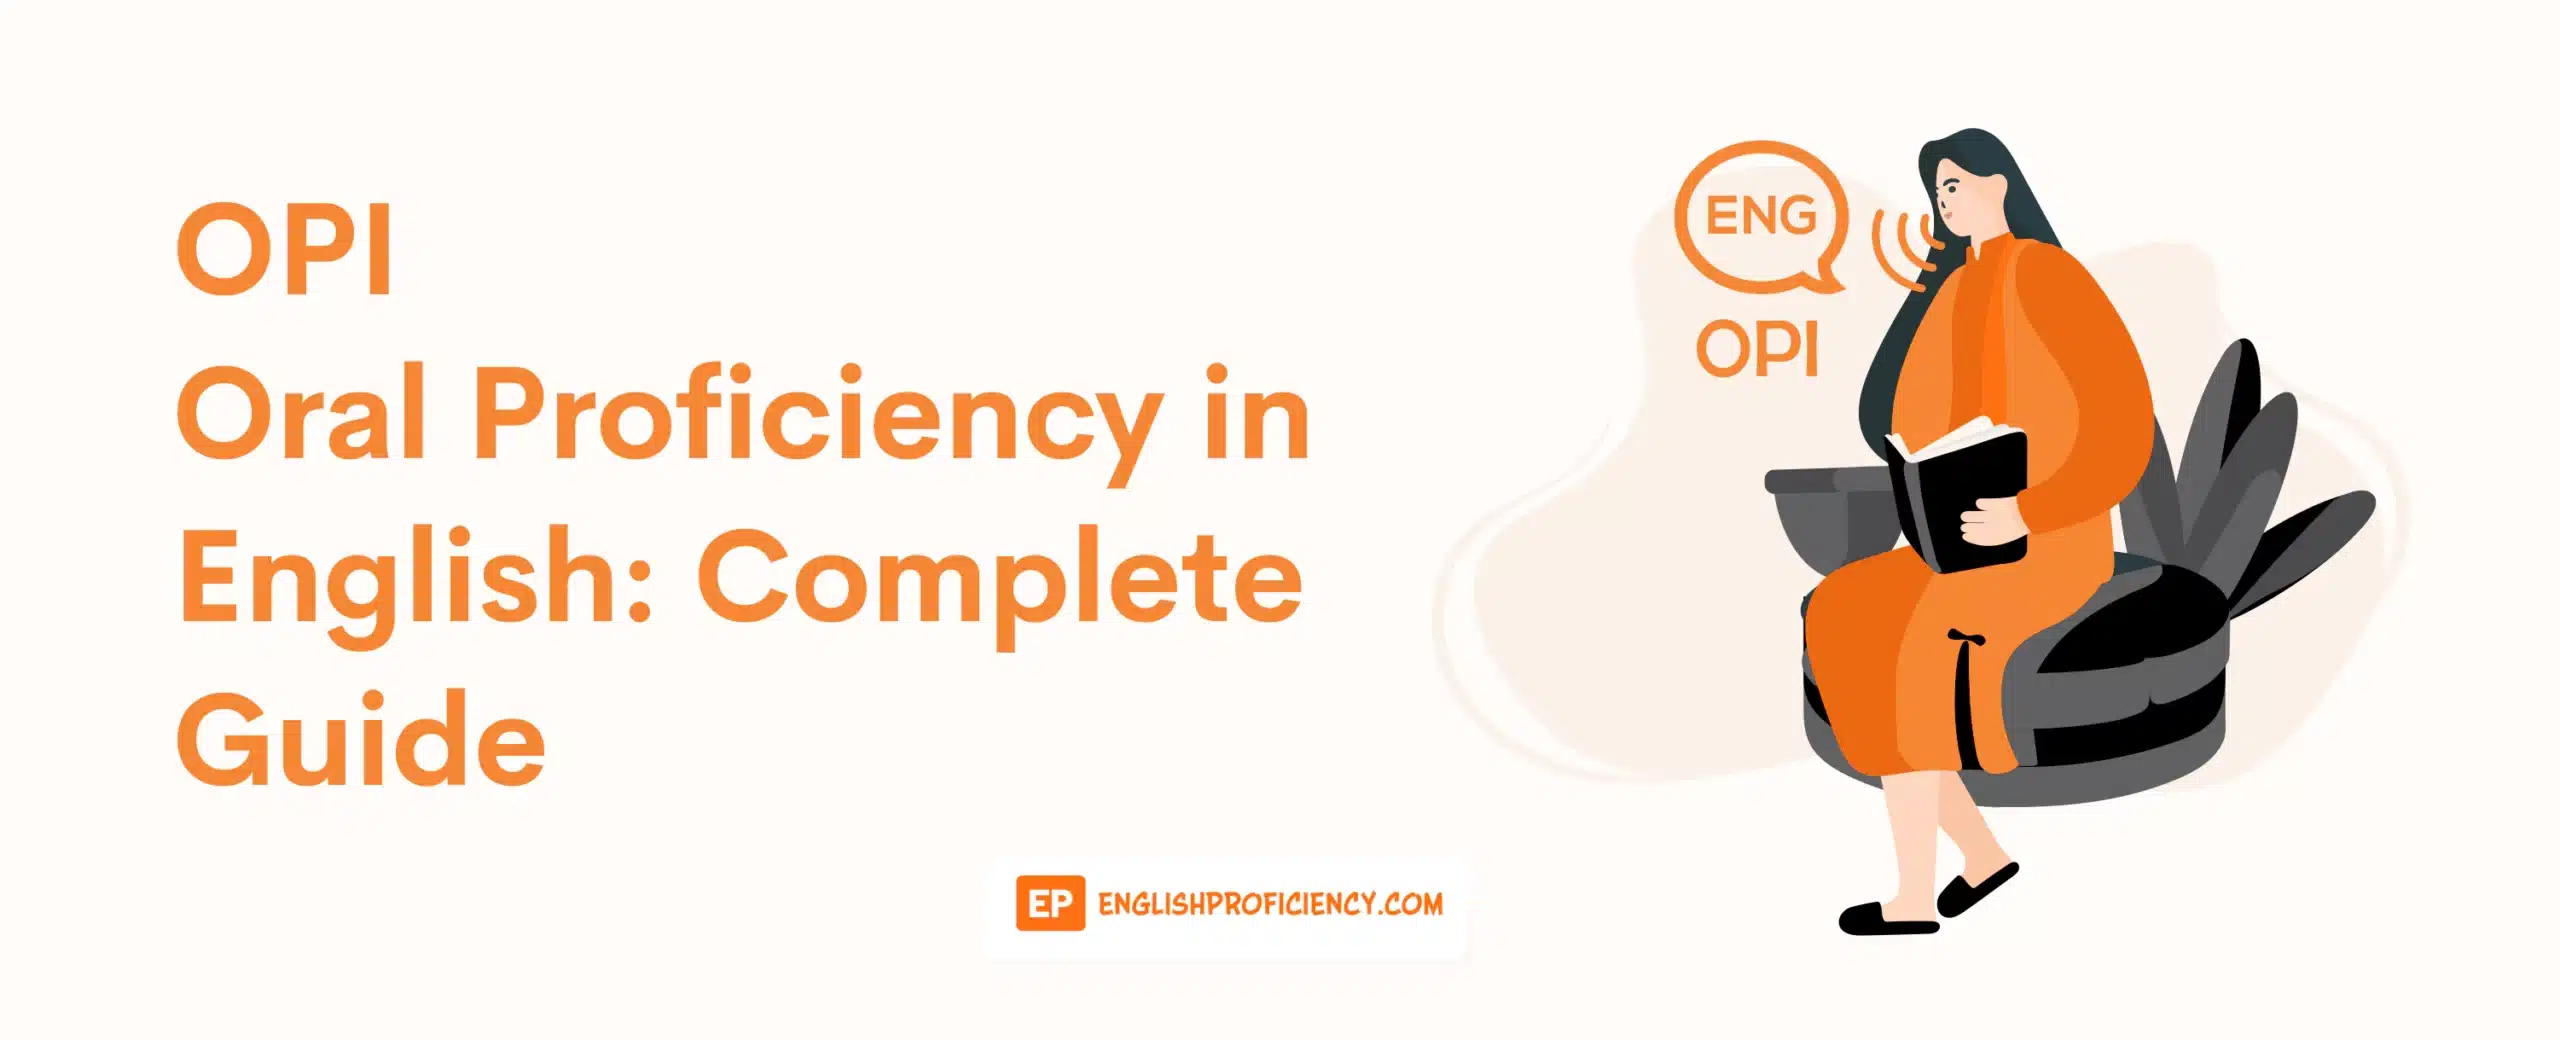 OPI Oral Proficiency Interview Complete Guide